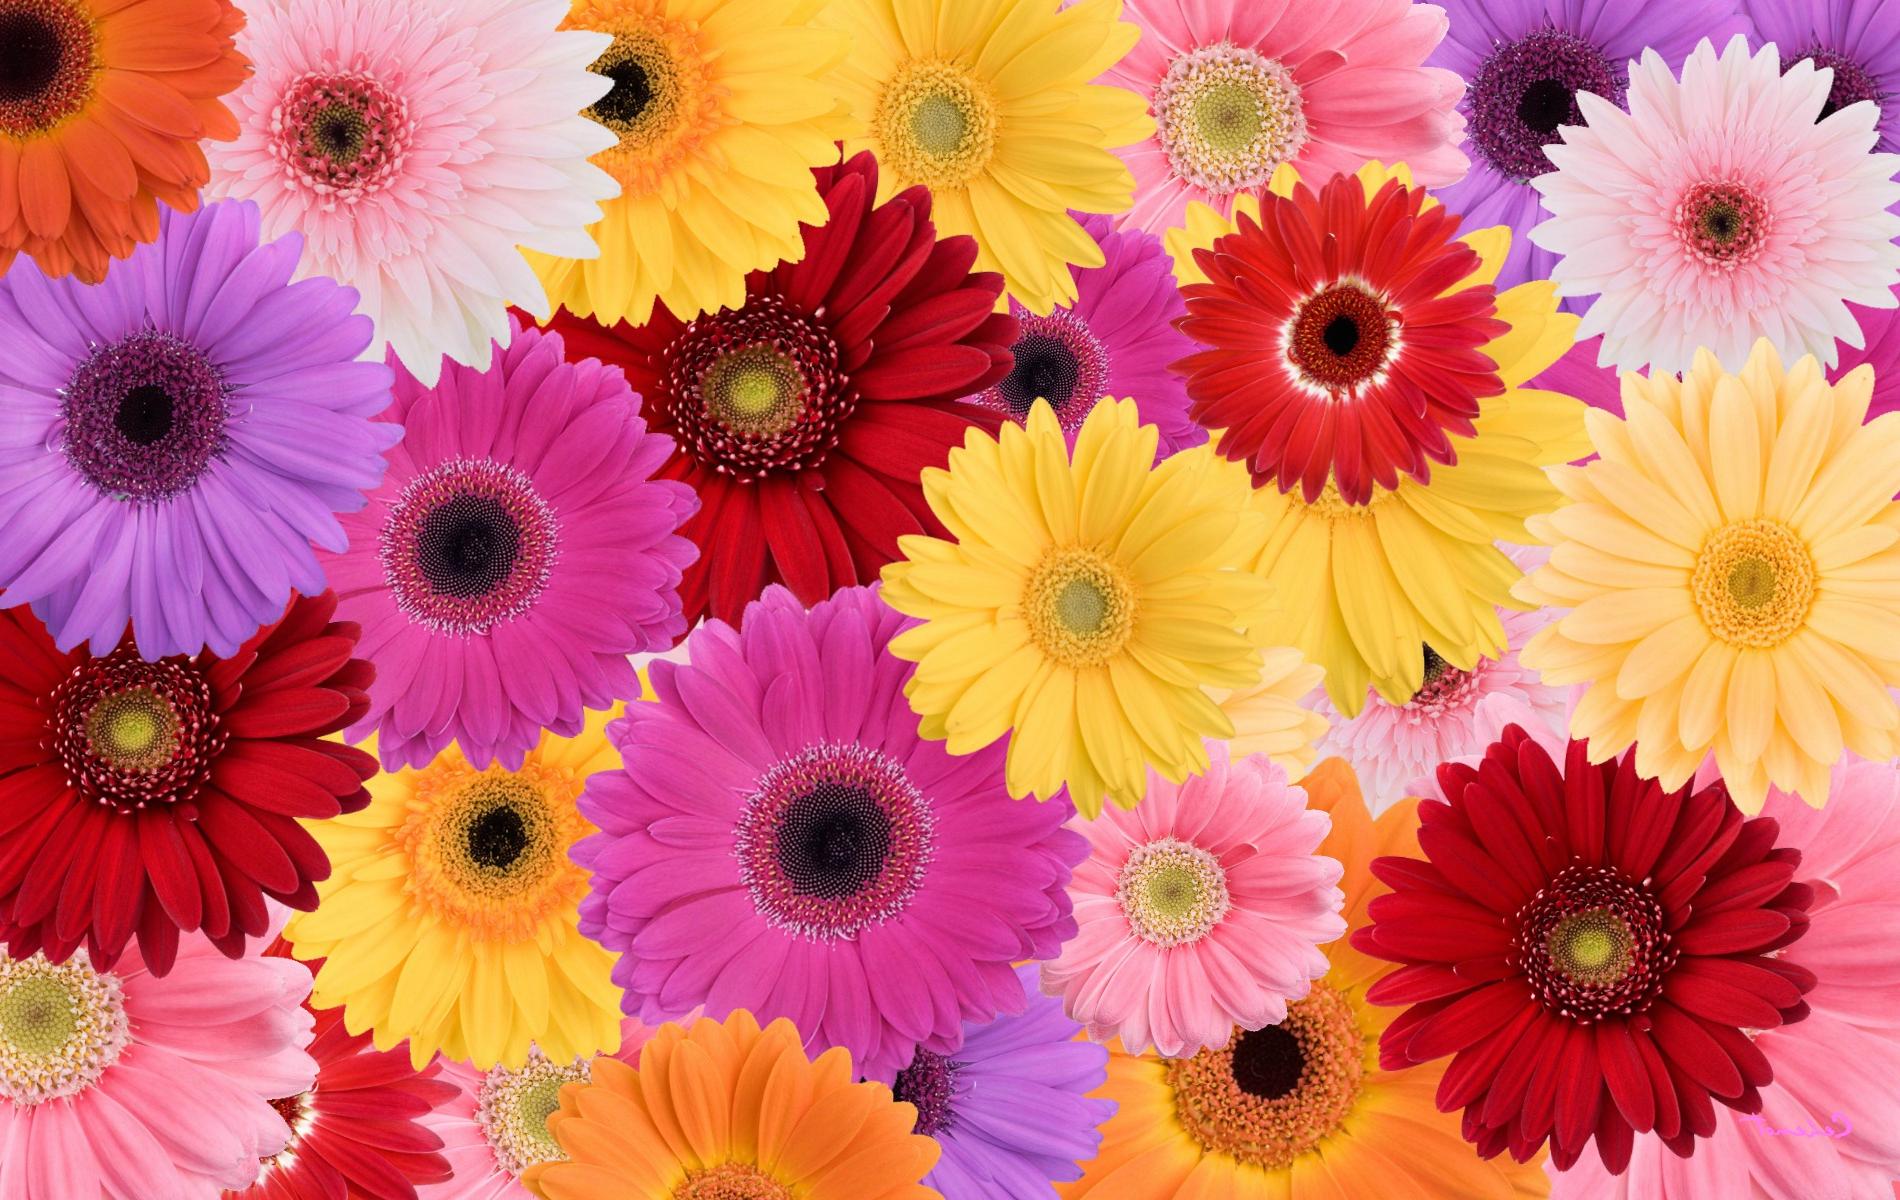 Daisies Collage Flower Red Purple Yellow By HD wallpaper